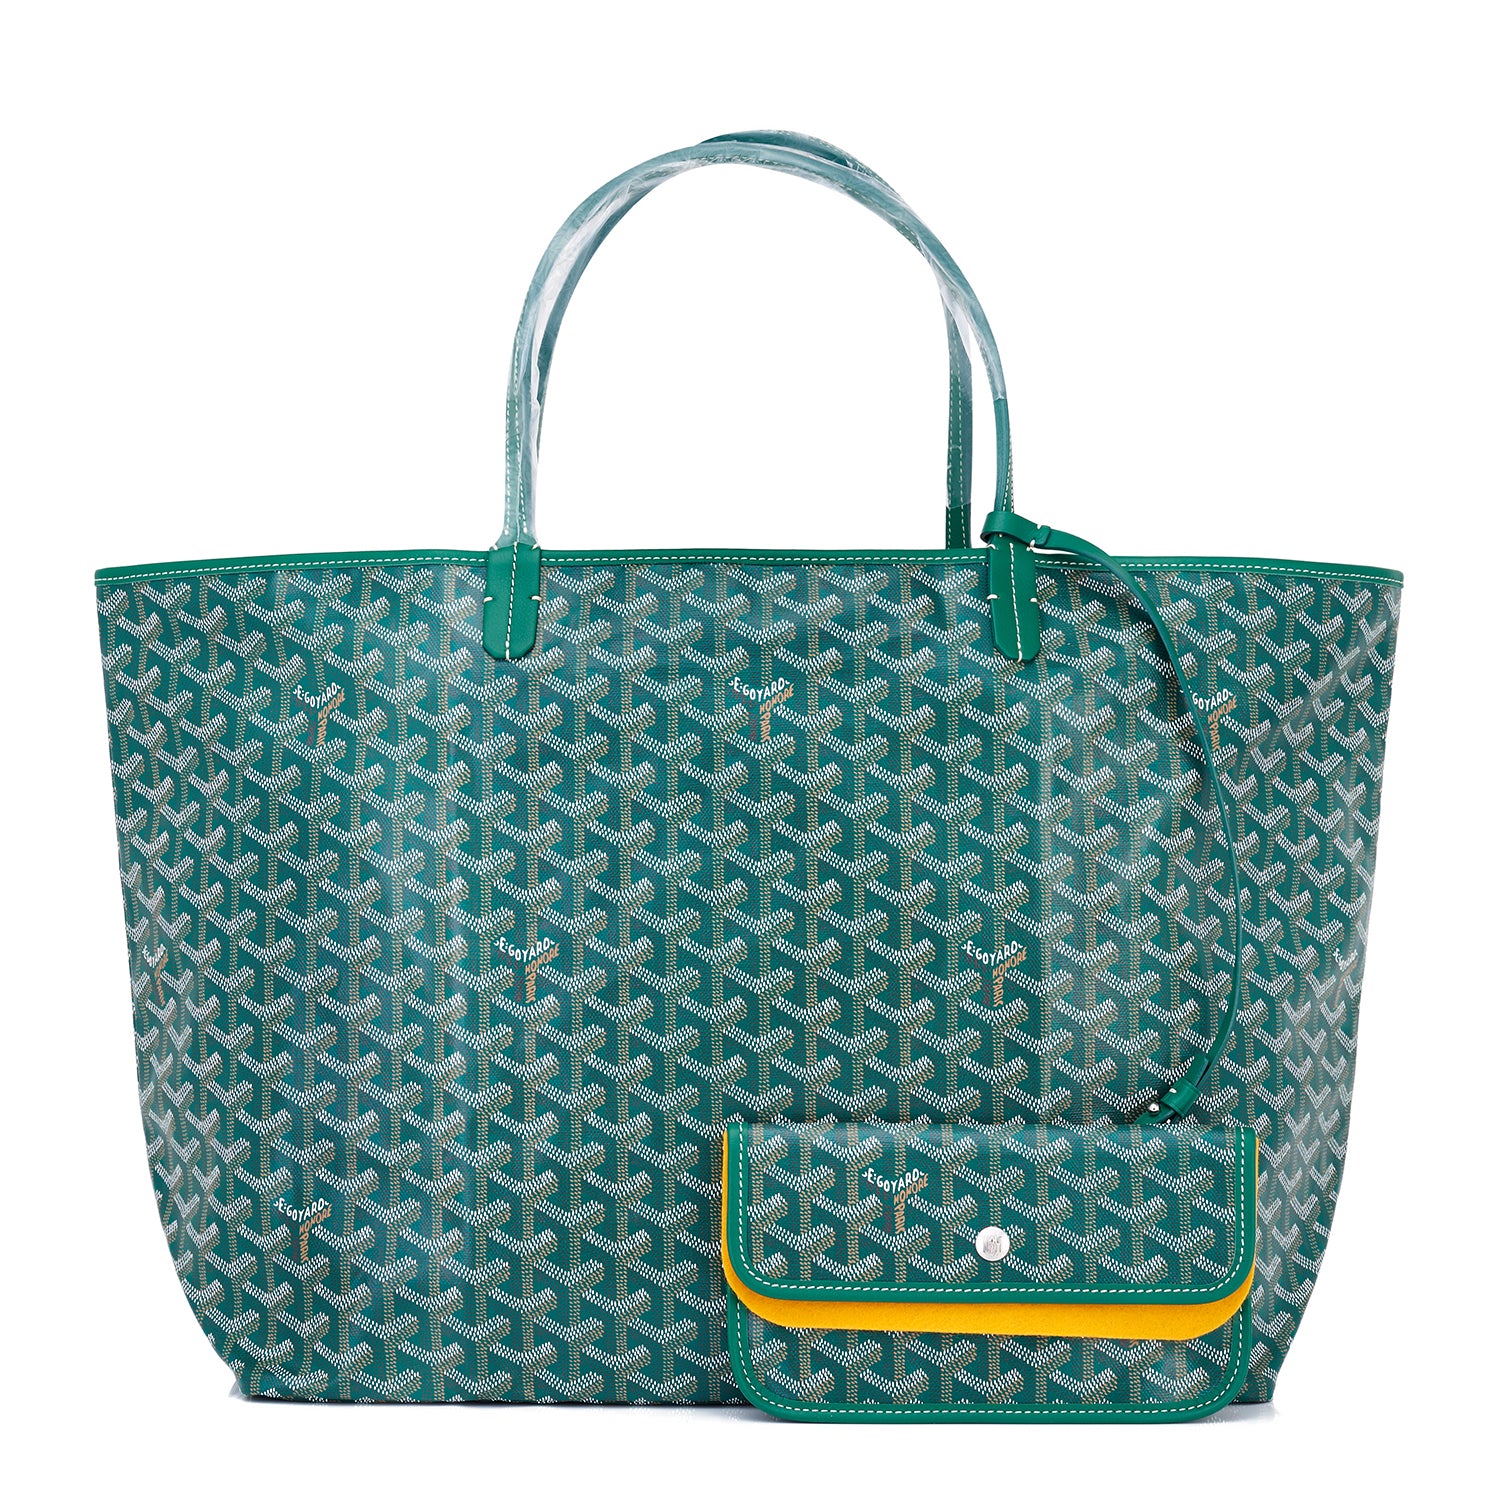 A Bollywood-favoured Goyard tote makes its presence felt on The White Lotus